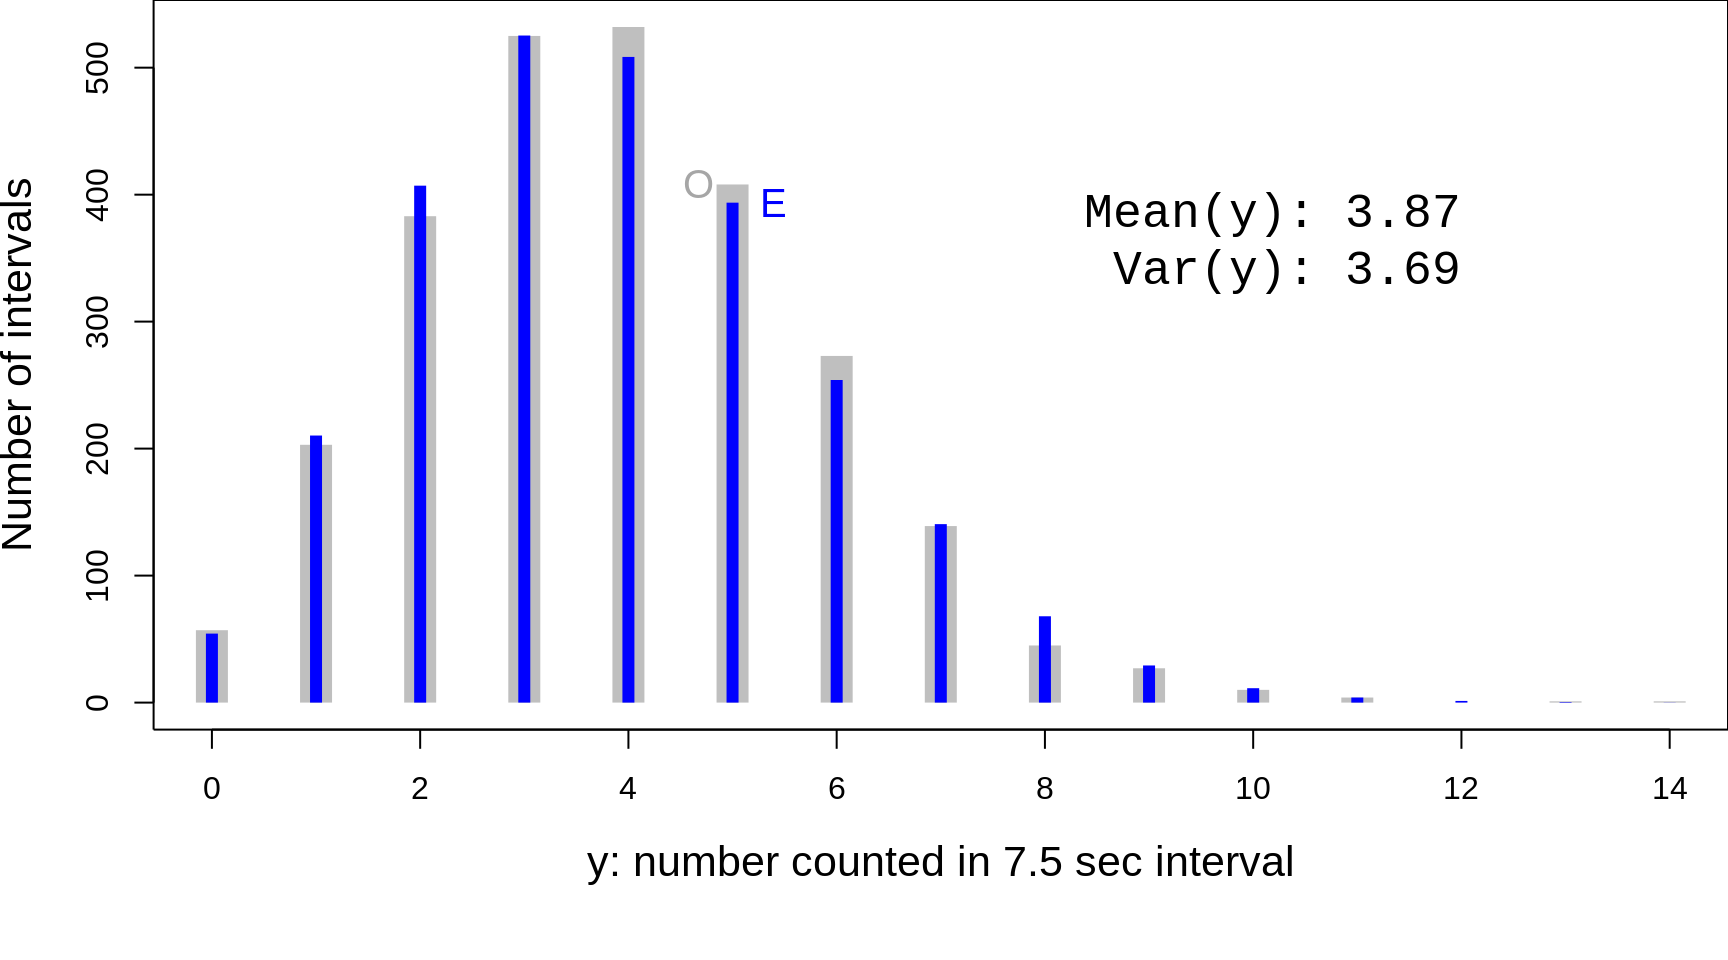 Rutherford's Fig 1, replotted, and the discrete scale emphasized. O =' 'Observed' frequencies; E = 'Expected' or 'Theoretical' or 'Fitted' frequencies. Rutherford et al. derived the  theoretical distribution (blue) 'from scratch' by a very different method than Poisson (see 'Note' on pages 704-707 of their article), and made no reference to Poisson's formula.